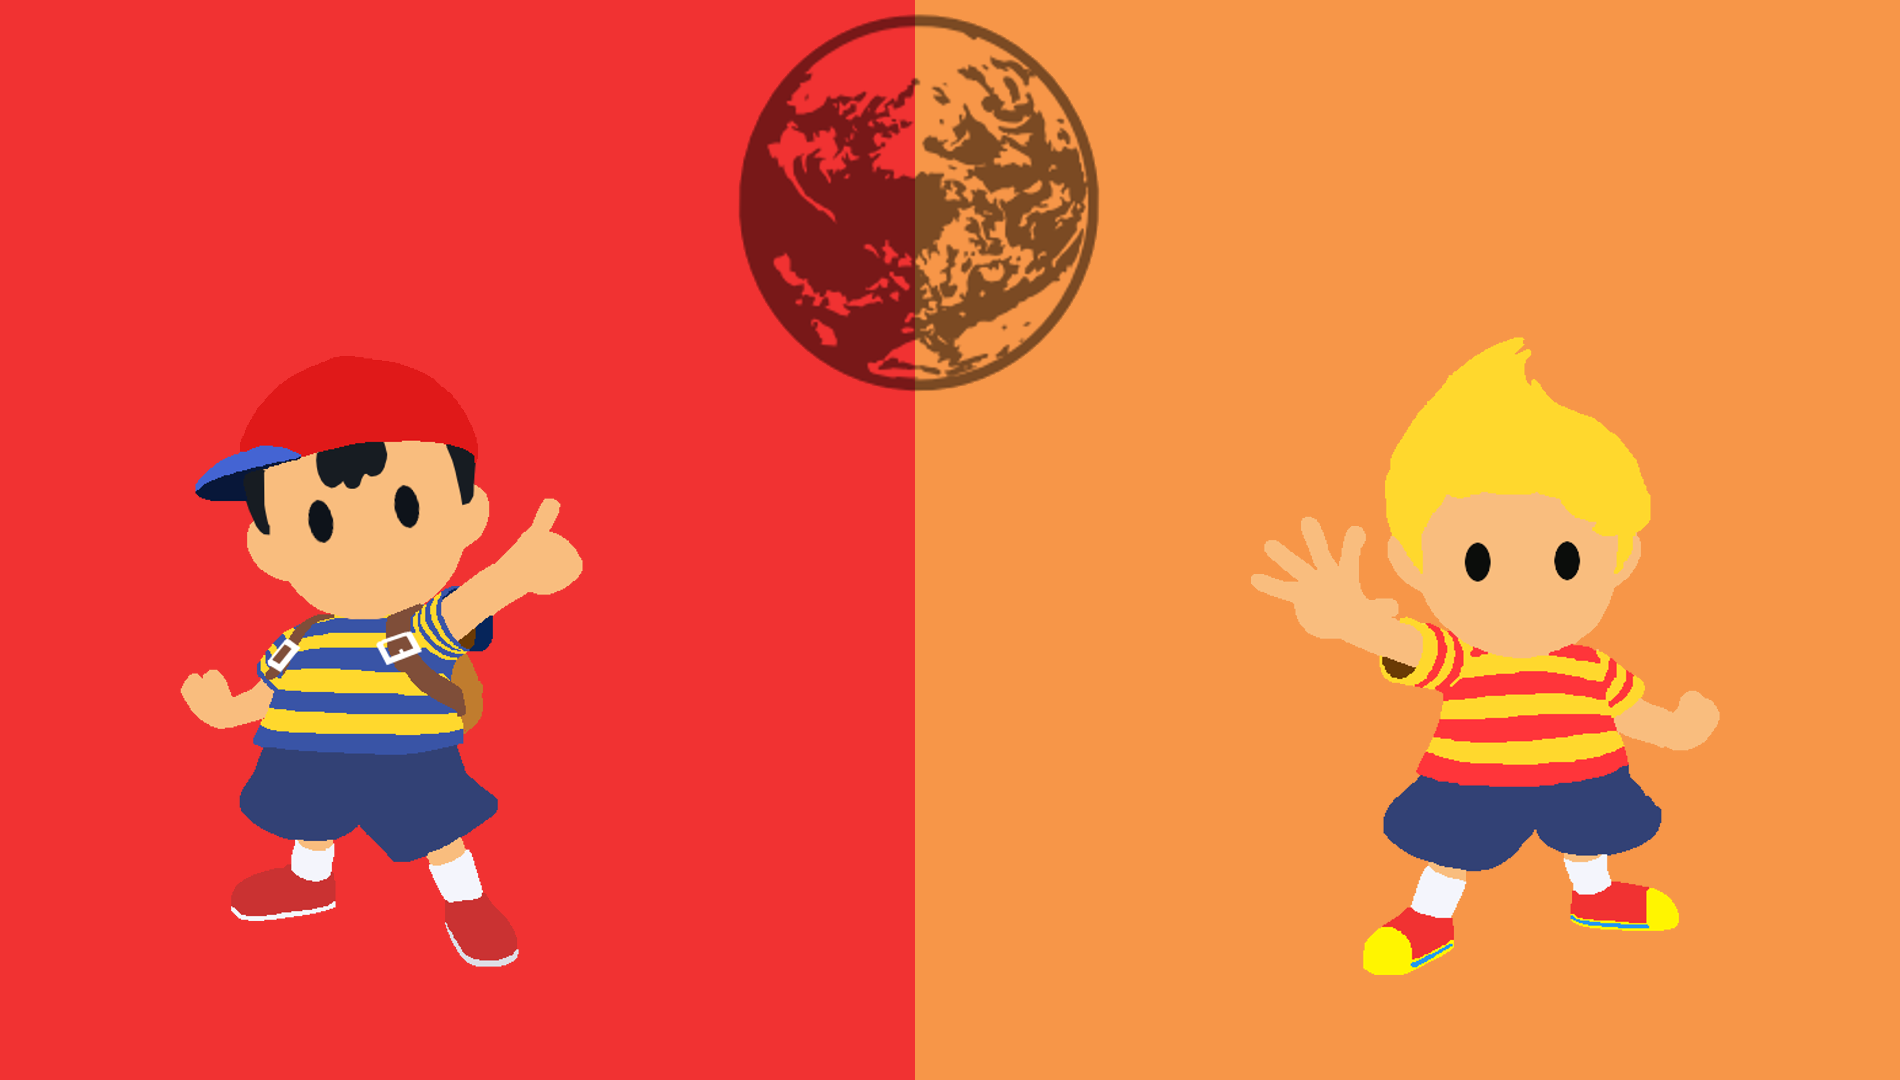 Ness and Lucas Minimalistic Wallpaper by MI6zombieguy92 on